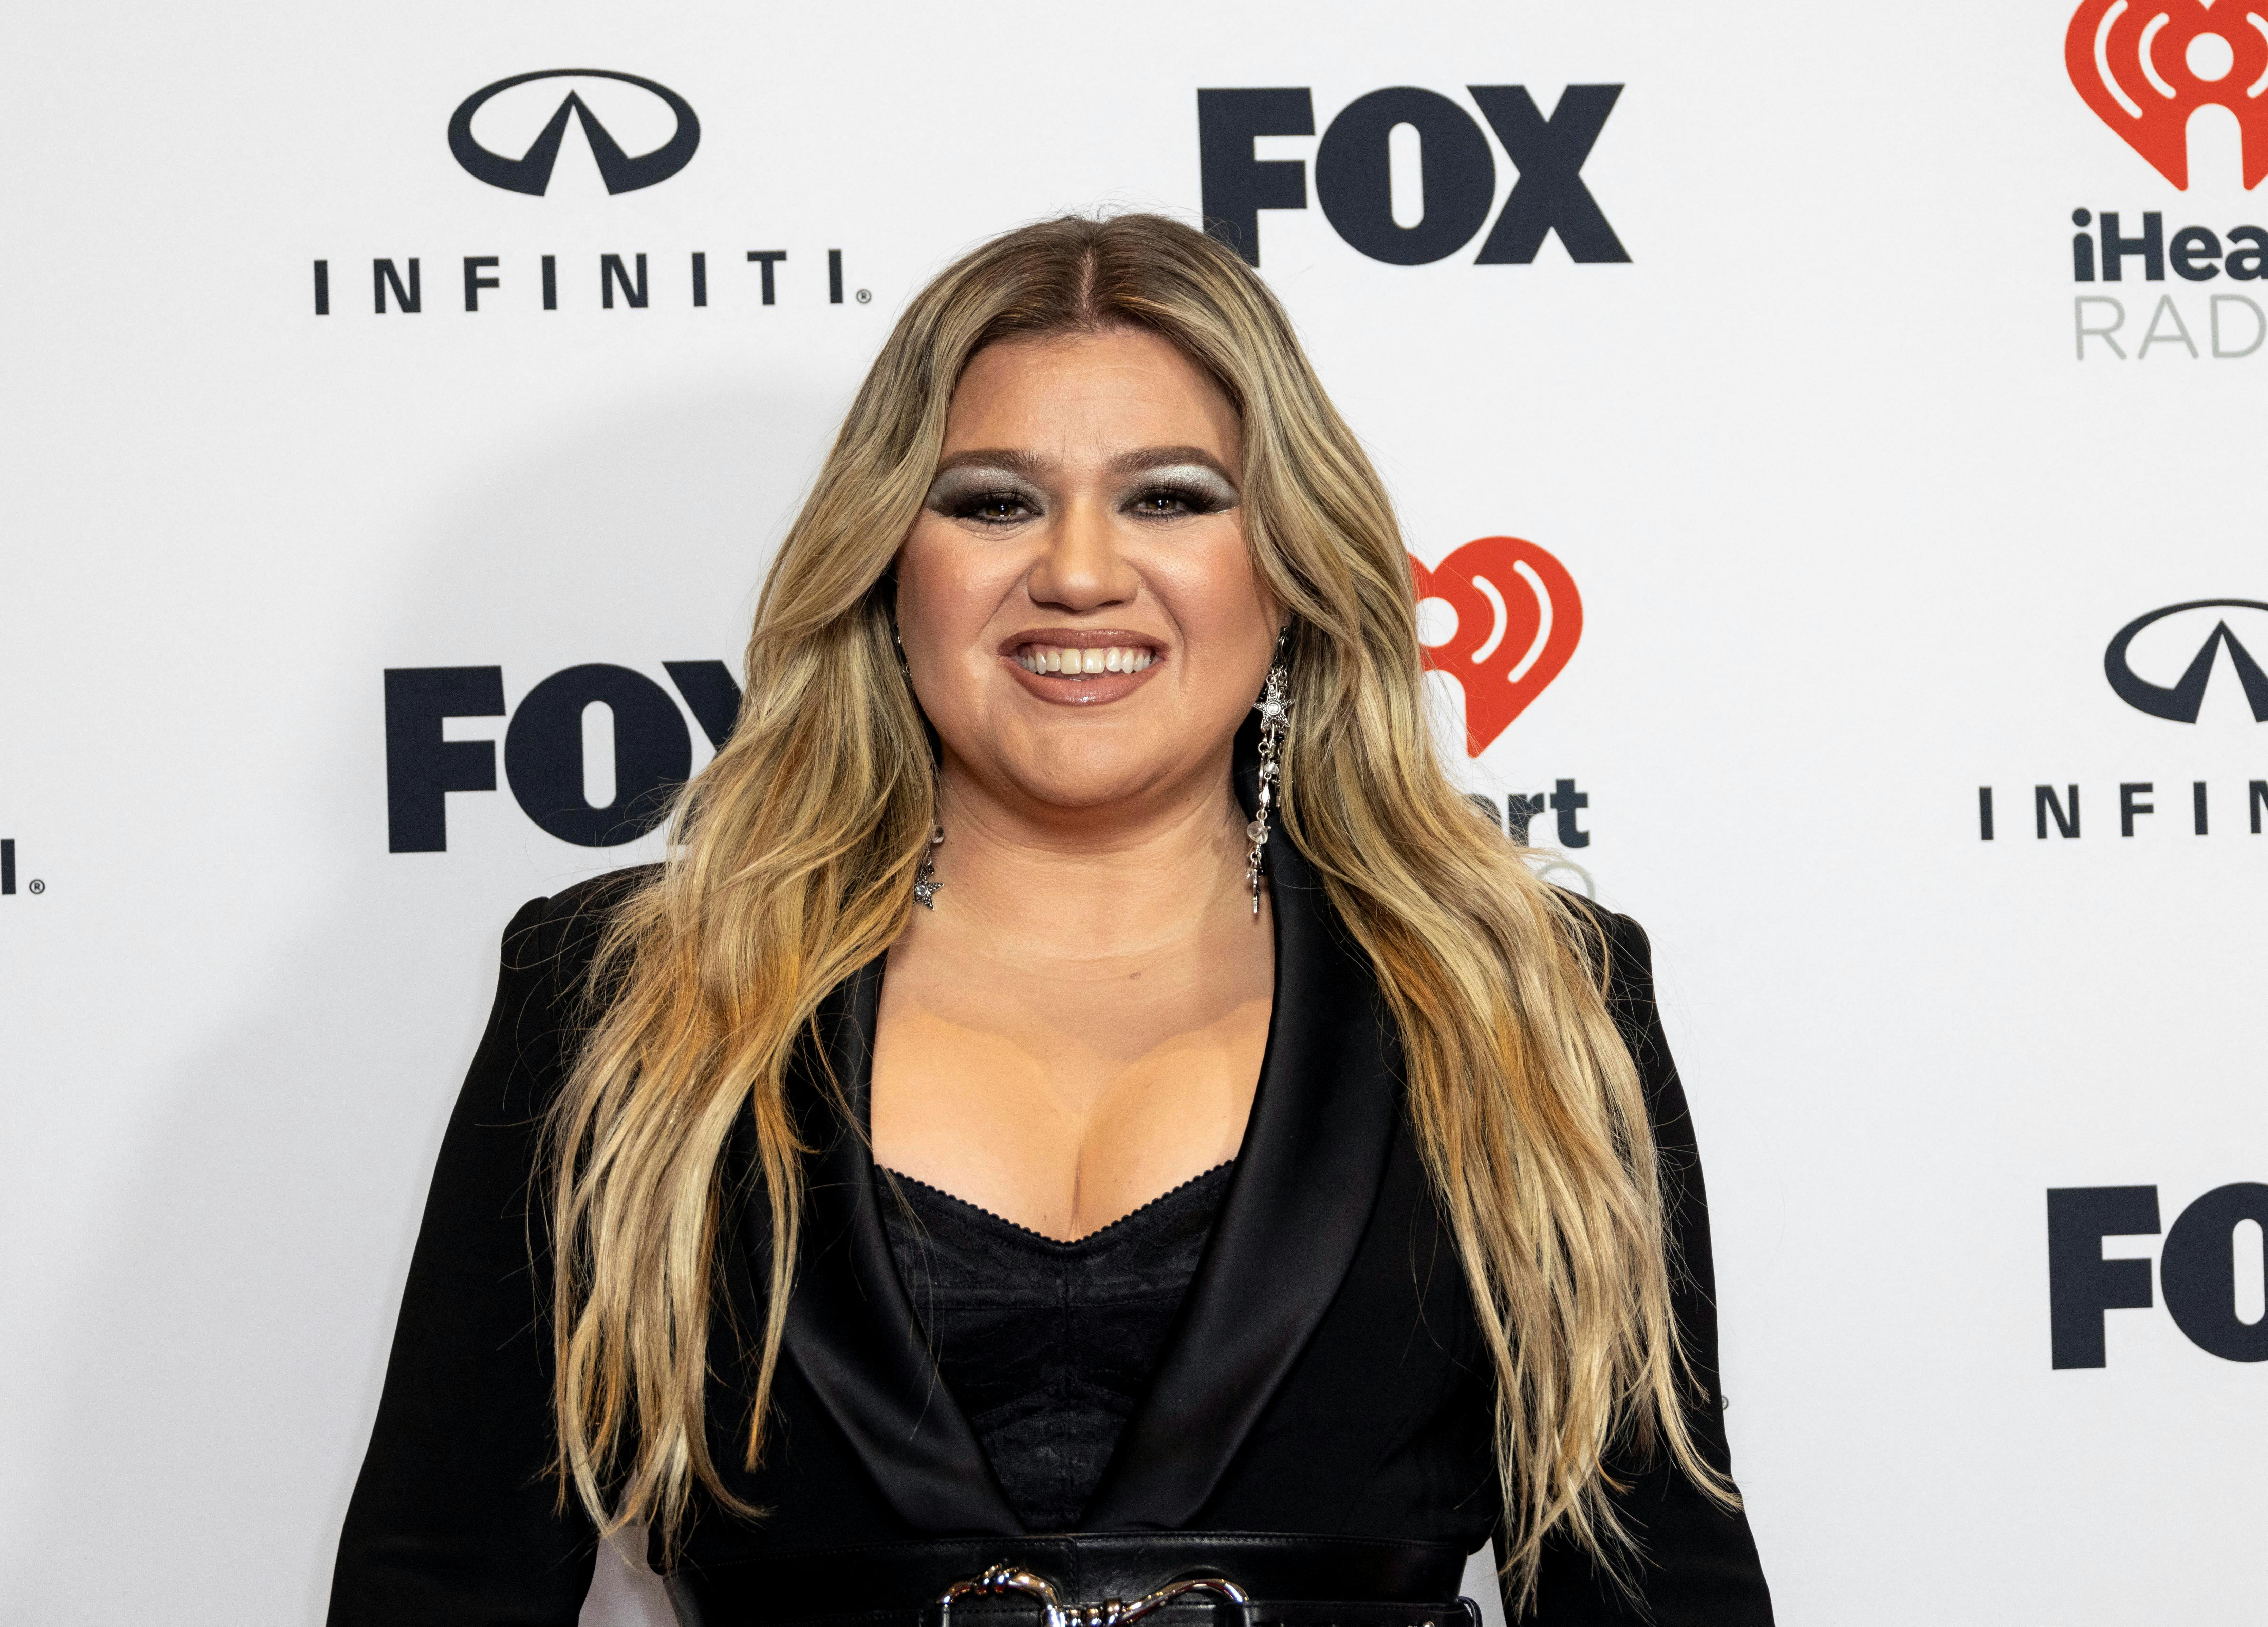 Kelly Clarkson poses during the iHeartRadio Music Awards in Los Angeles, California, U.S. March 27, 2023. REUTERS/Aude Guerrucci